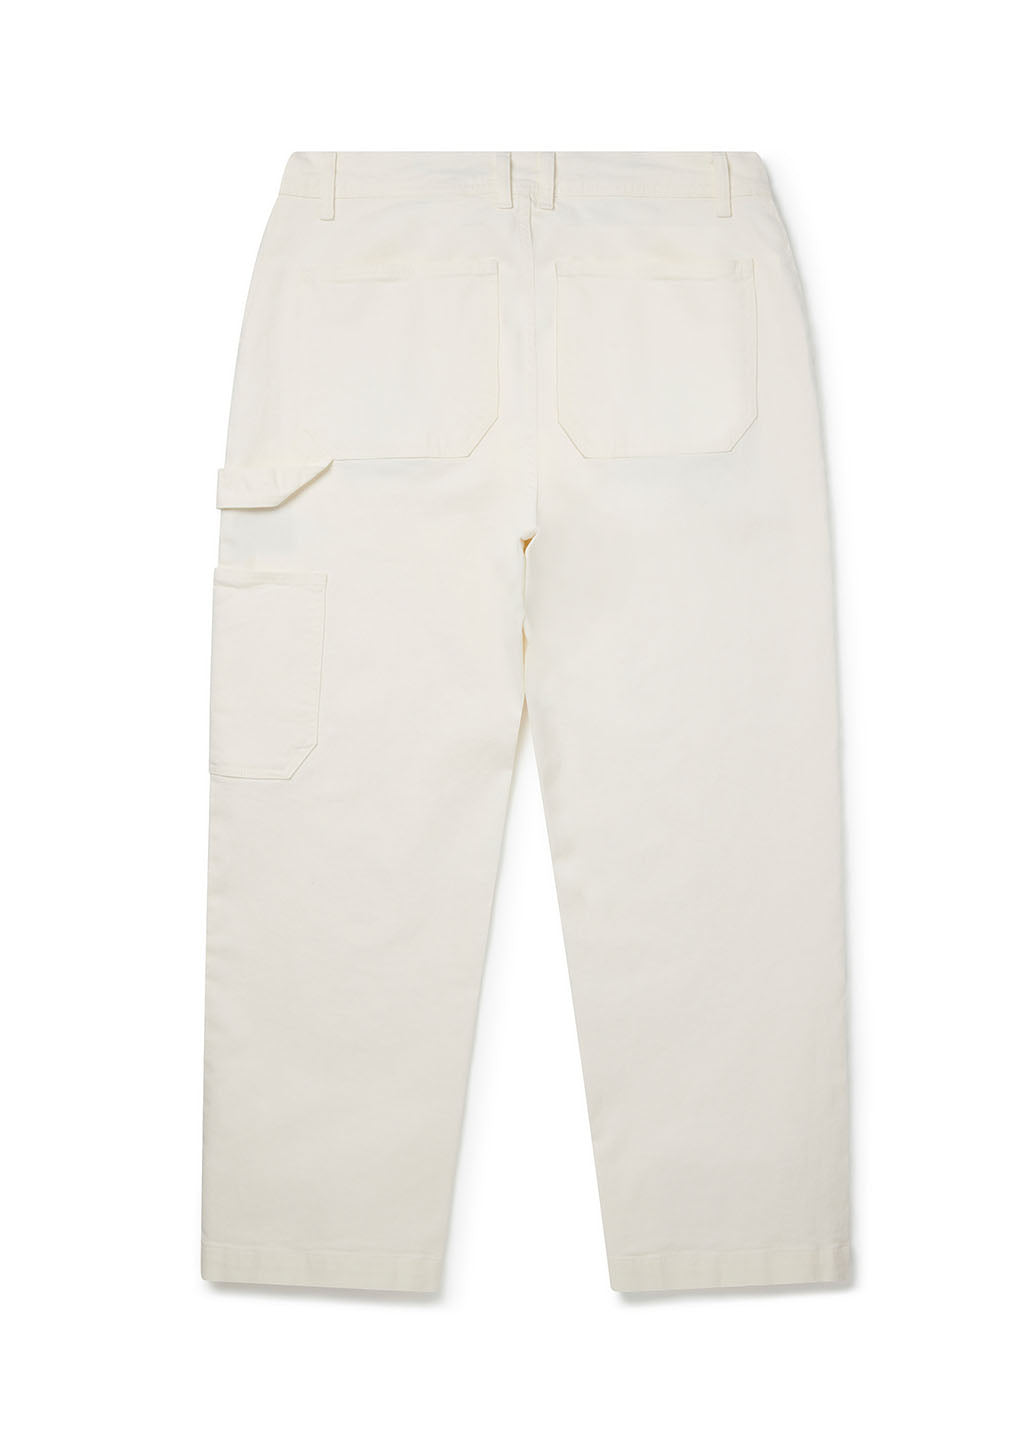 Work Trousers Jack white | Strauss